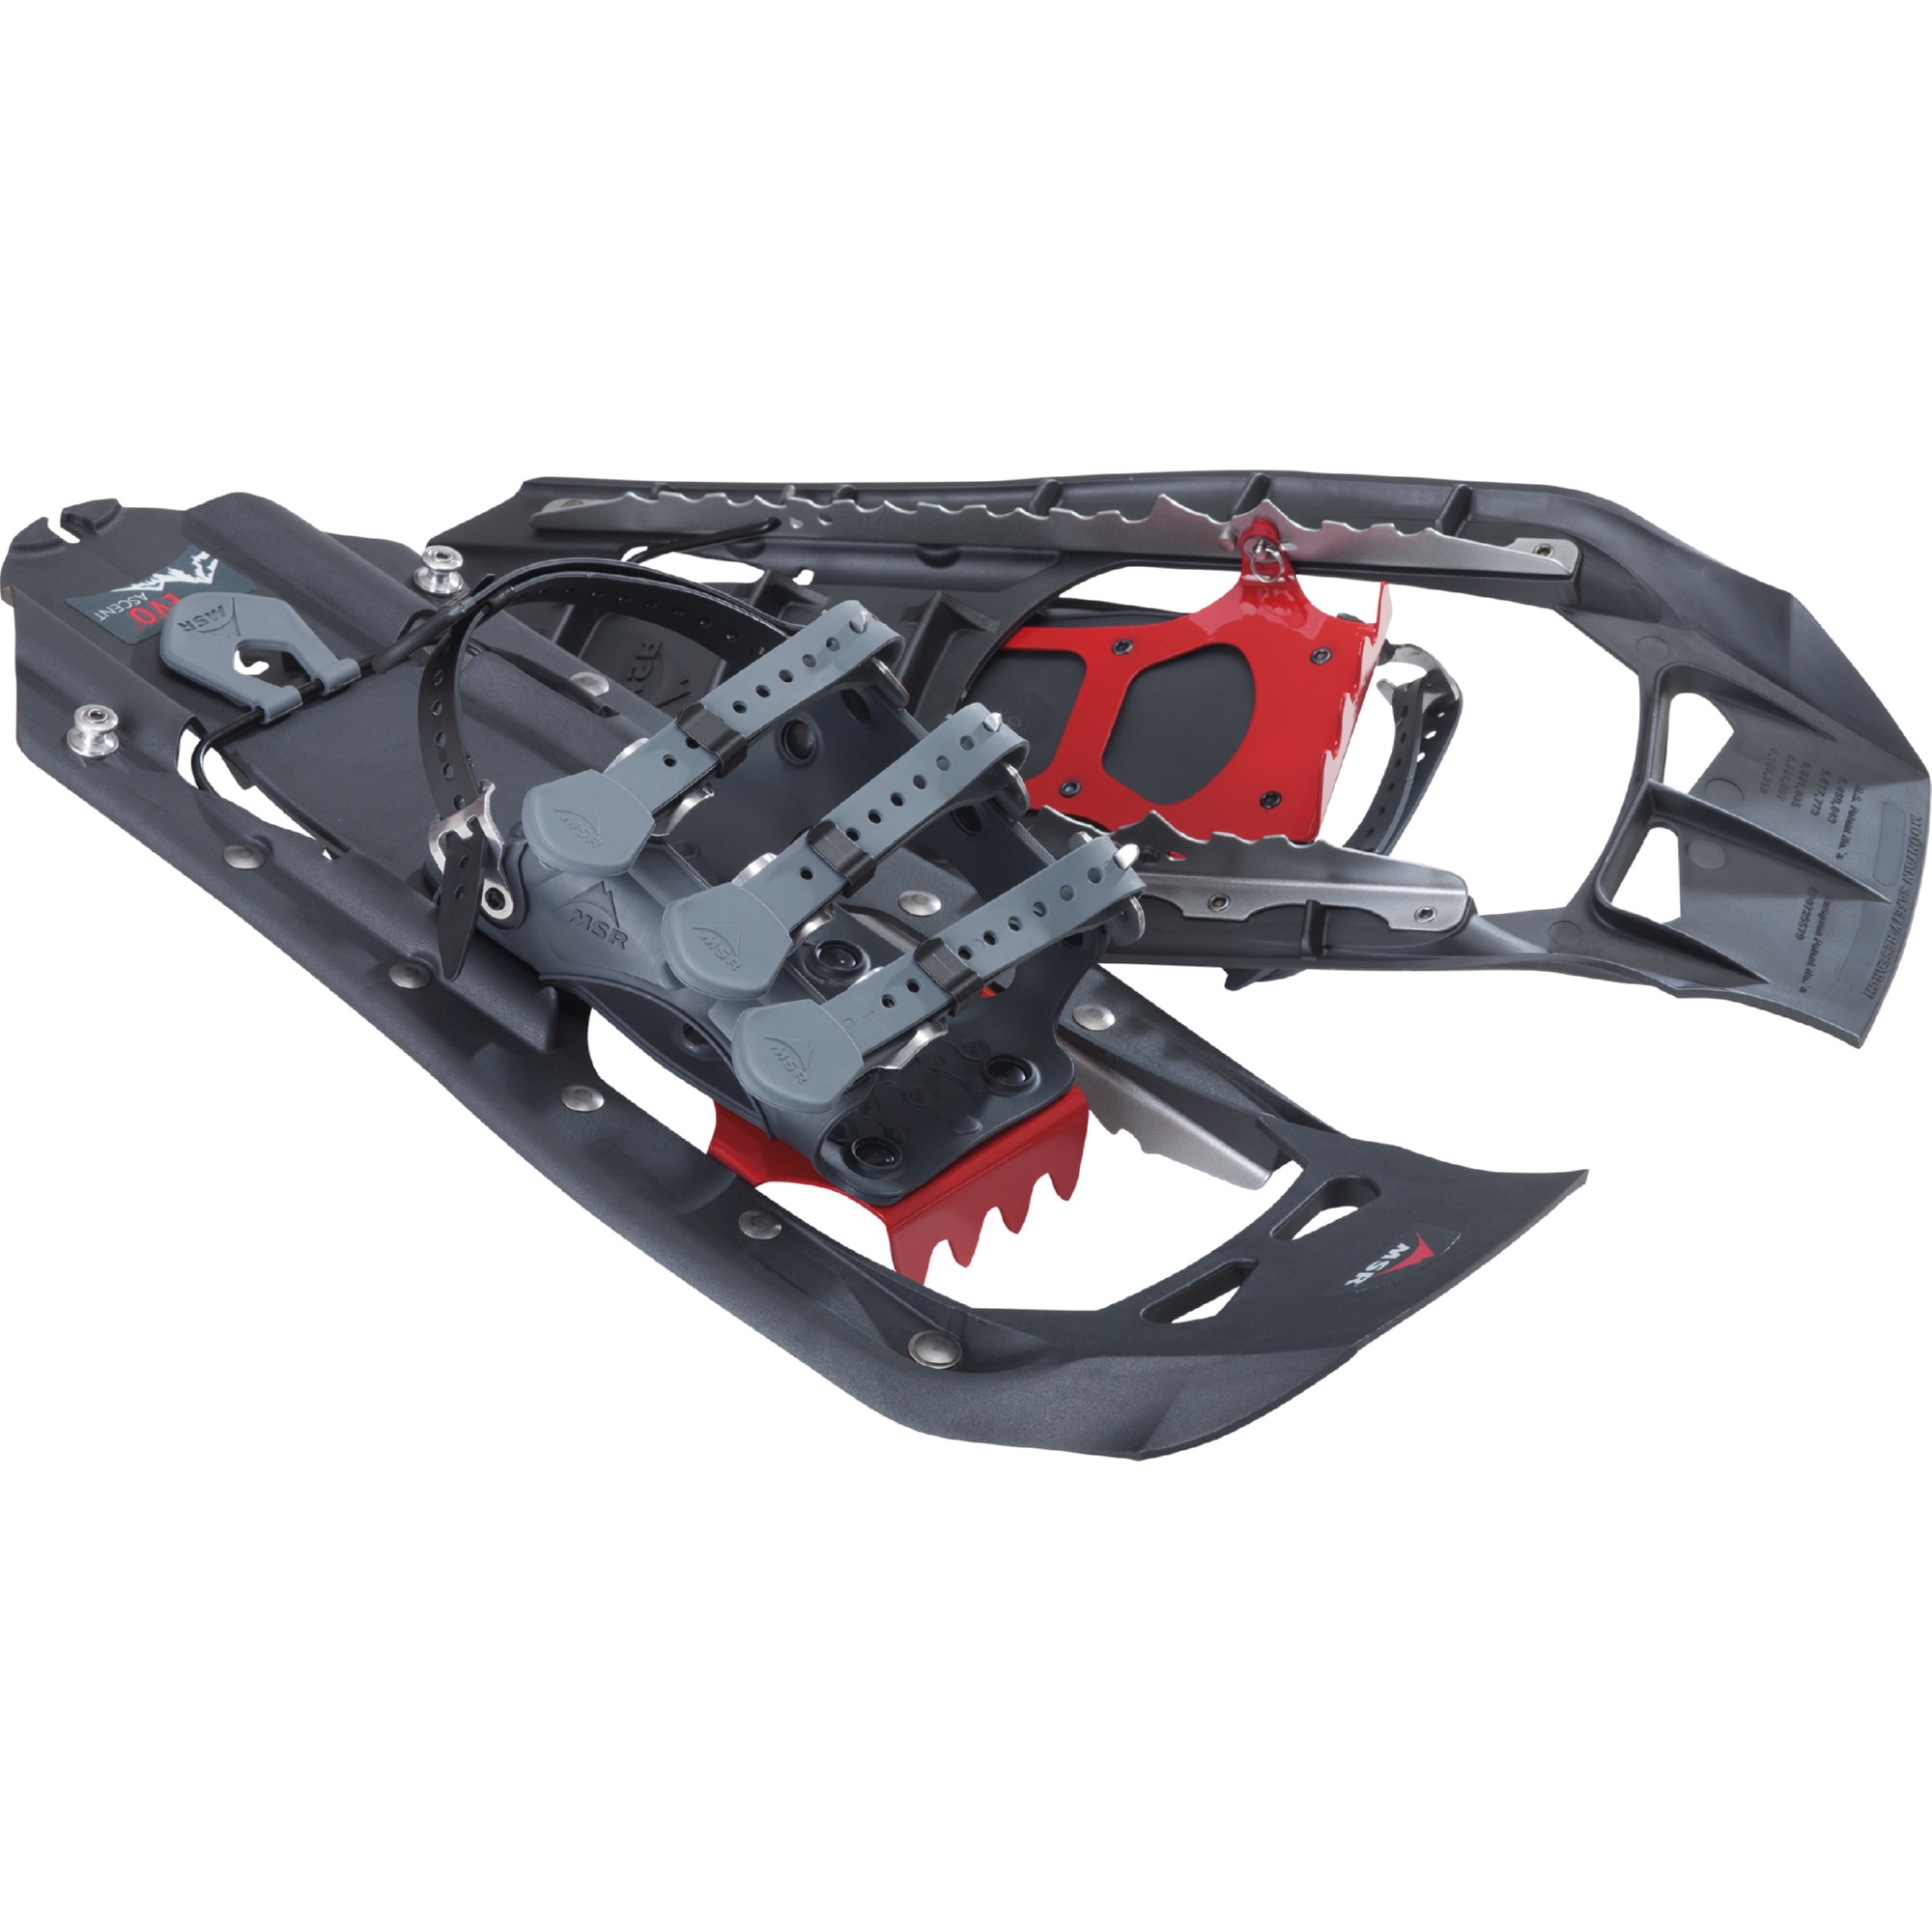 Evo Ascent 22 Snowshoes Stone Grey